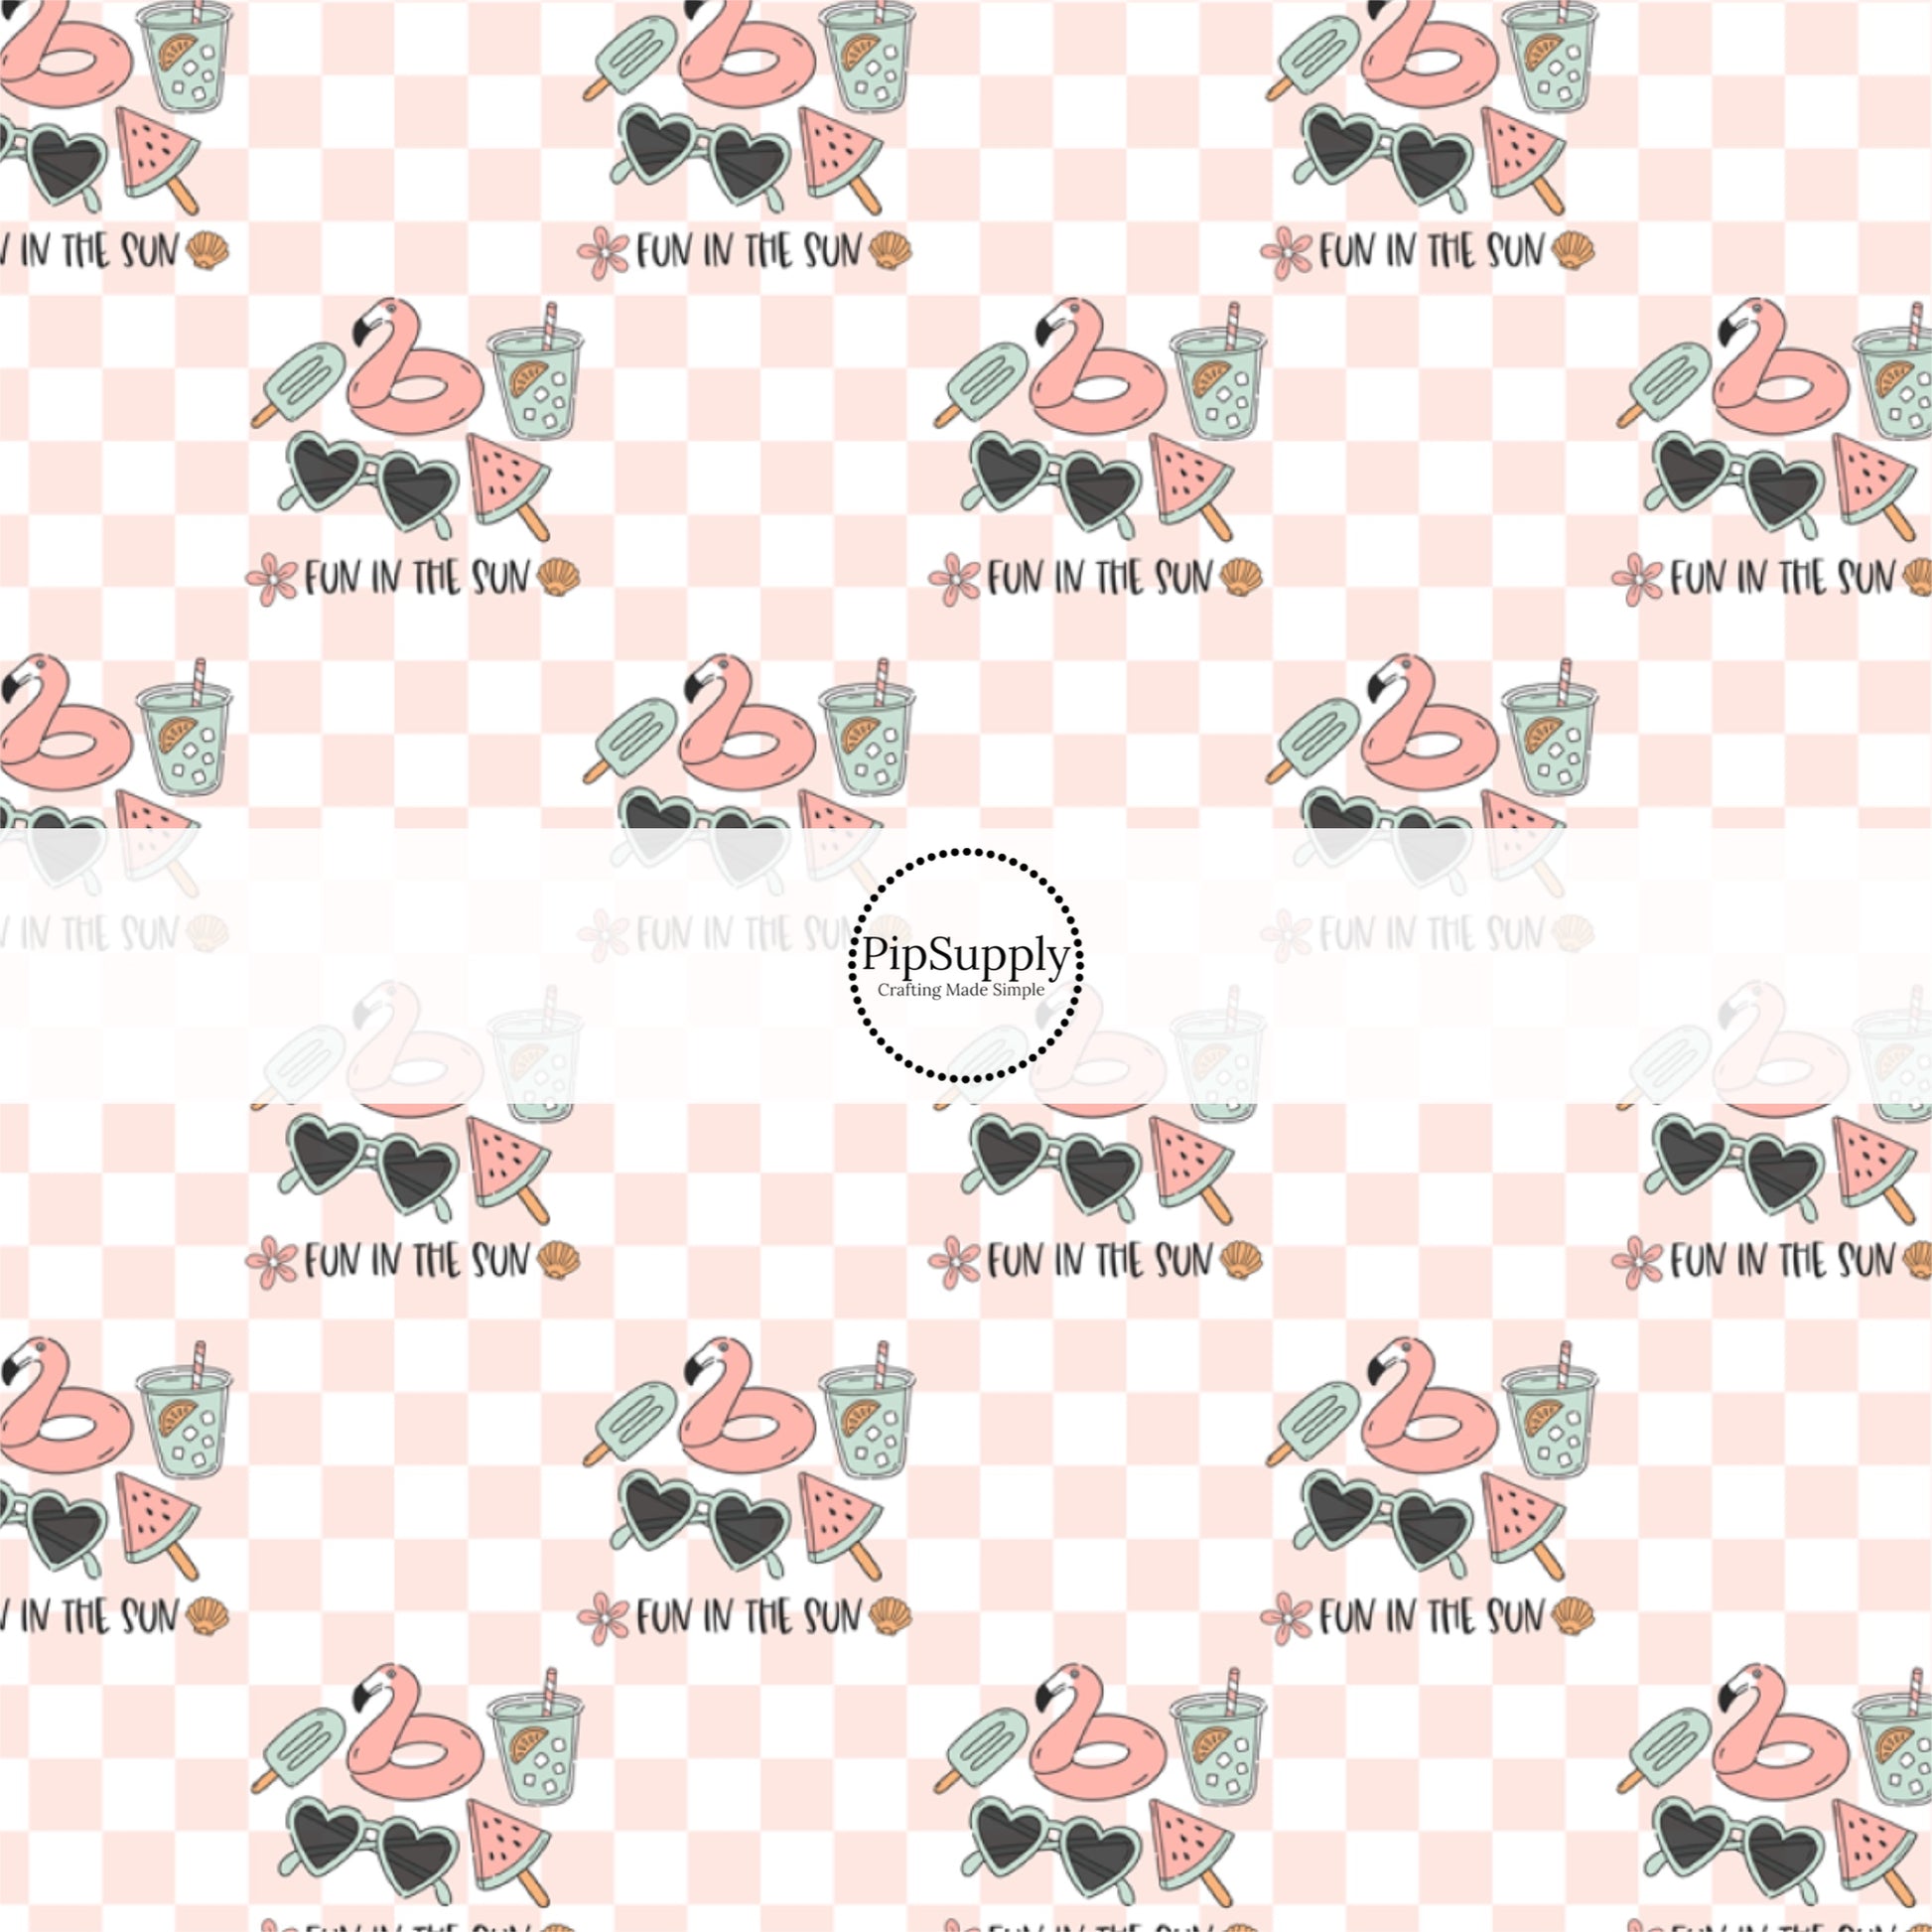 This summer fabric by the yard features summer pool items on pink and white checkered pattern. This fun summer themed fabric can be used for all your sewing and crafting needs!